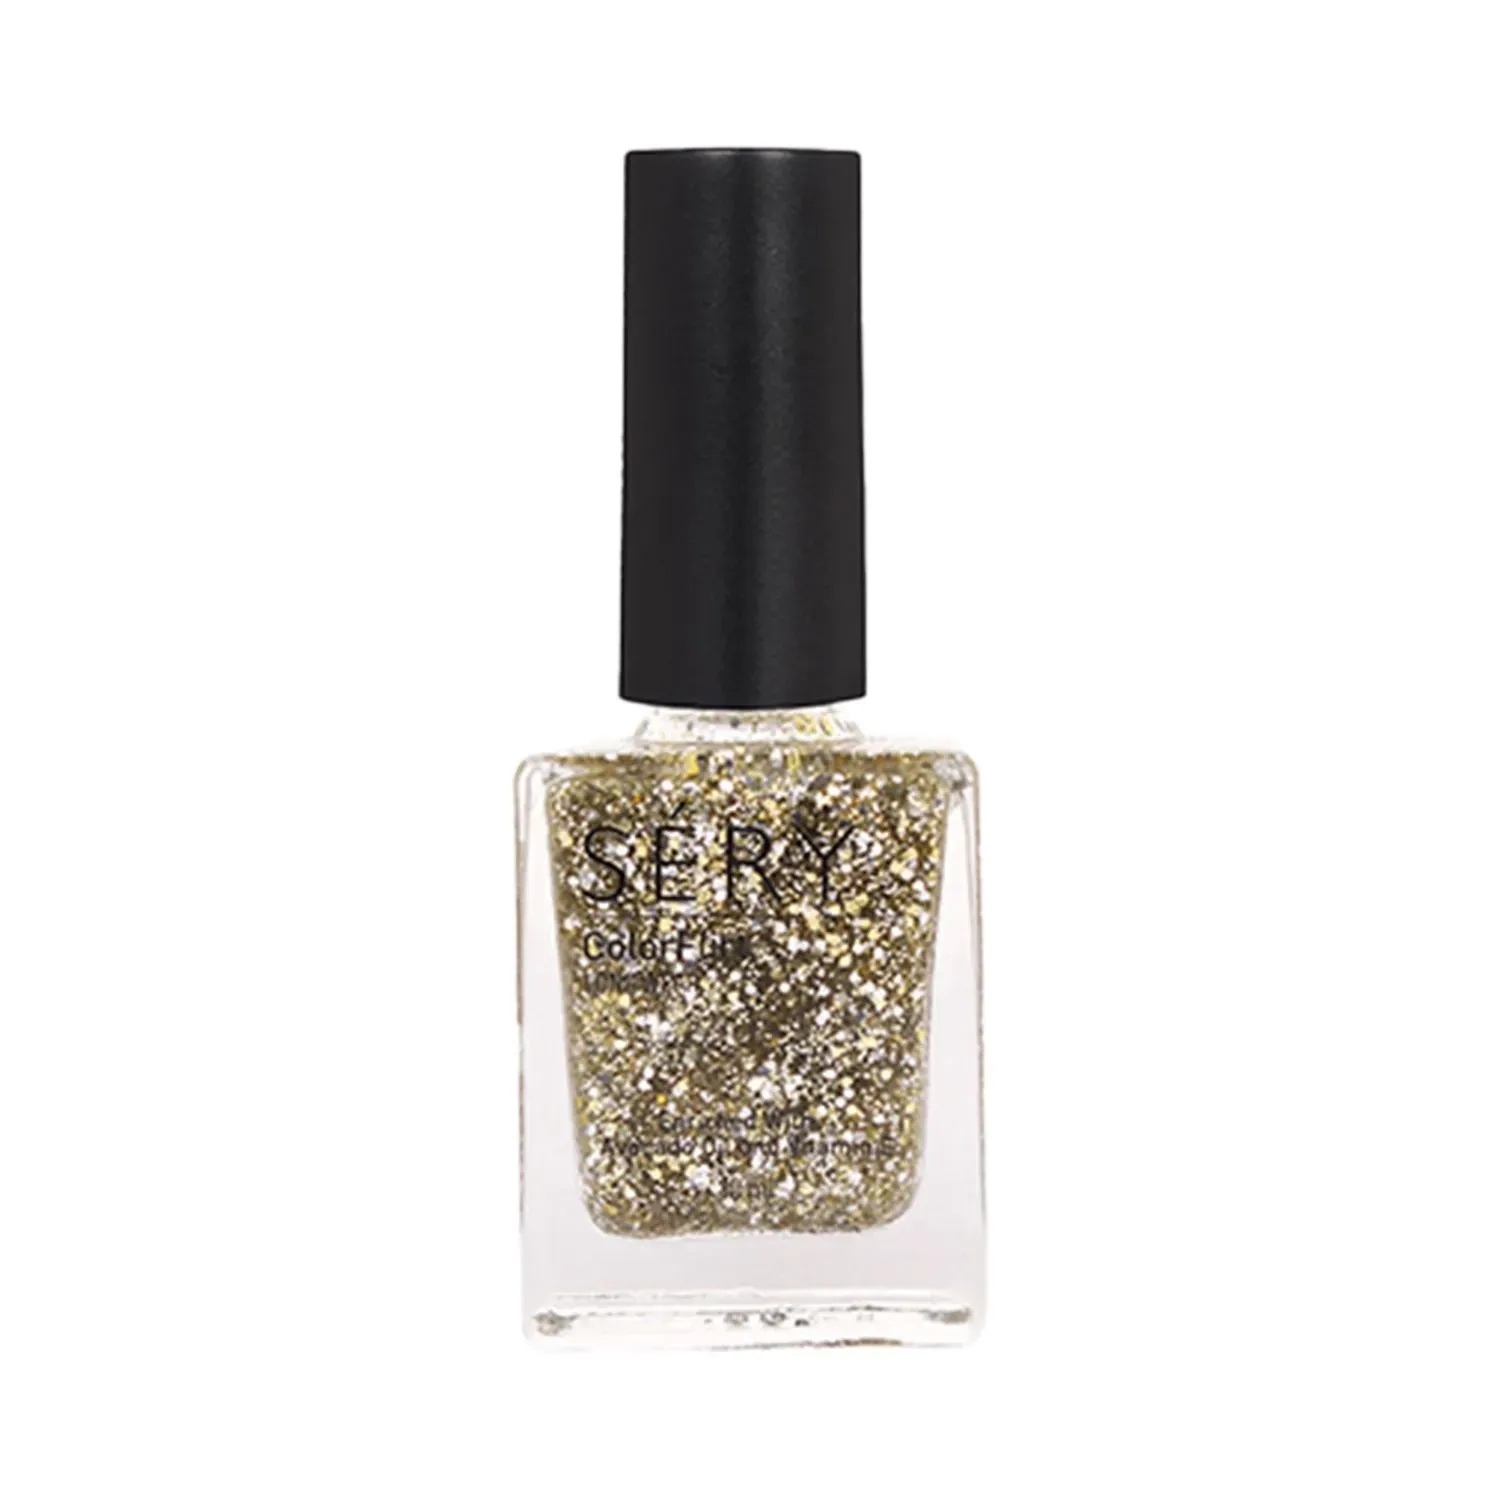 Swiss Beauty SB-MS60 High Shine Glitter Nail Polish Shade 07 - High  Coverage And Shine, Classy Look, Chip-Resistant Formula, Nail Paint |  GLAMOUR INDIA